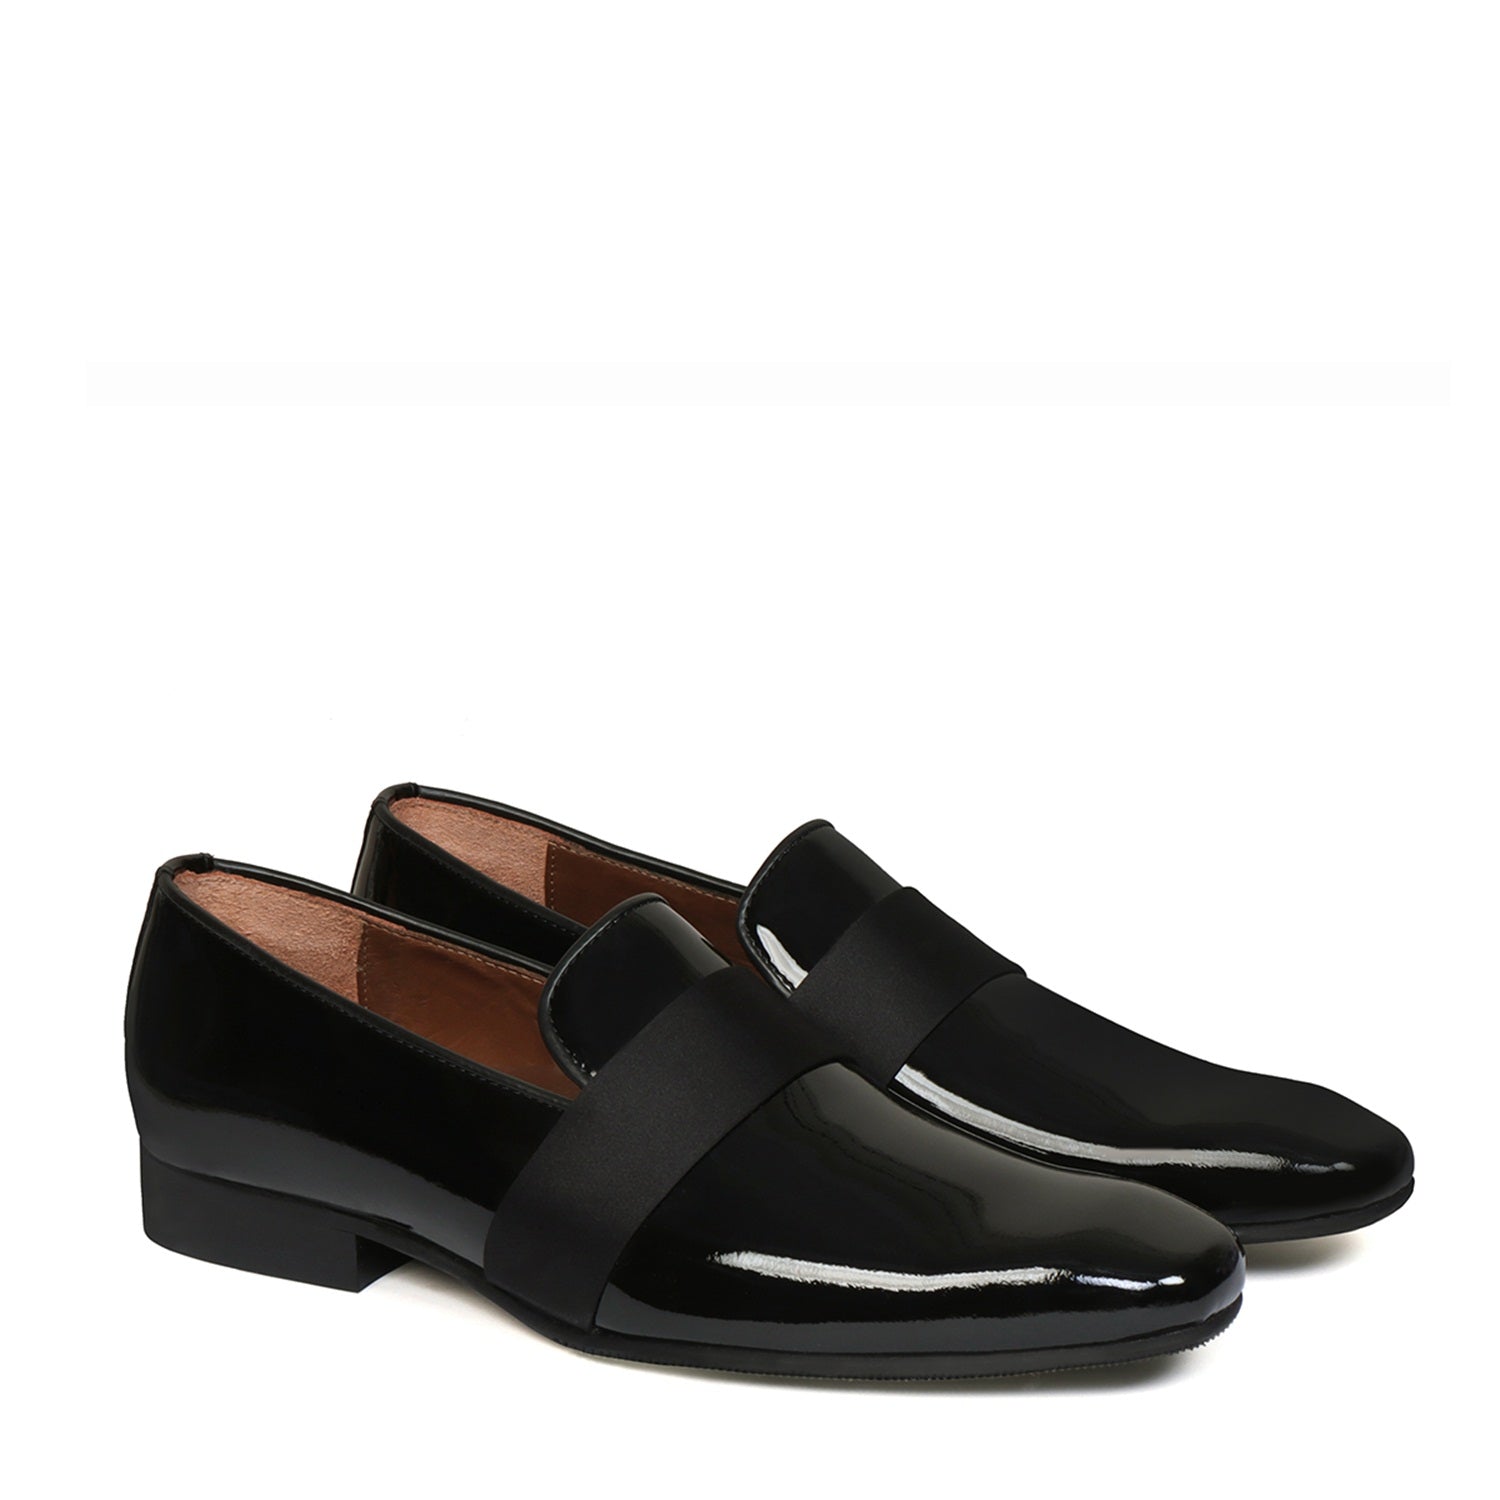 Black Patent Leather Slip-On Shoes with Mid-Strap Loafer Design